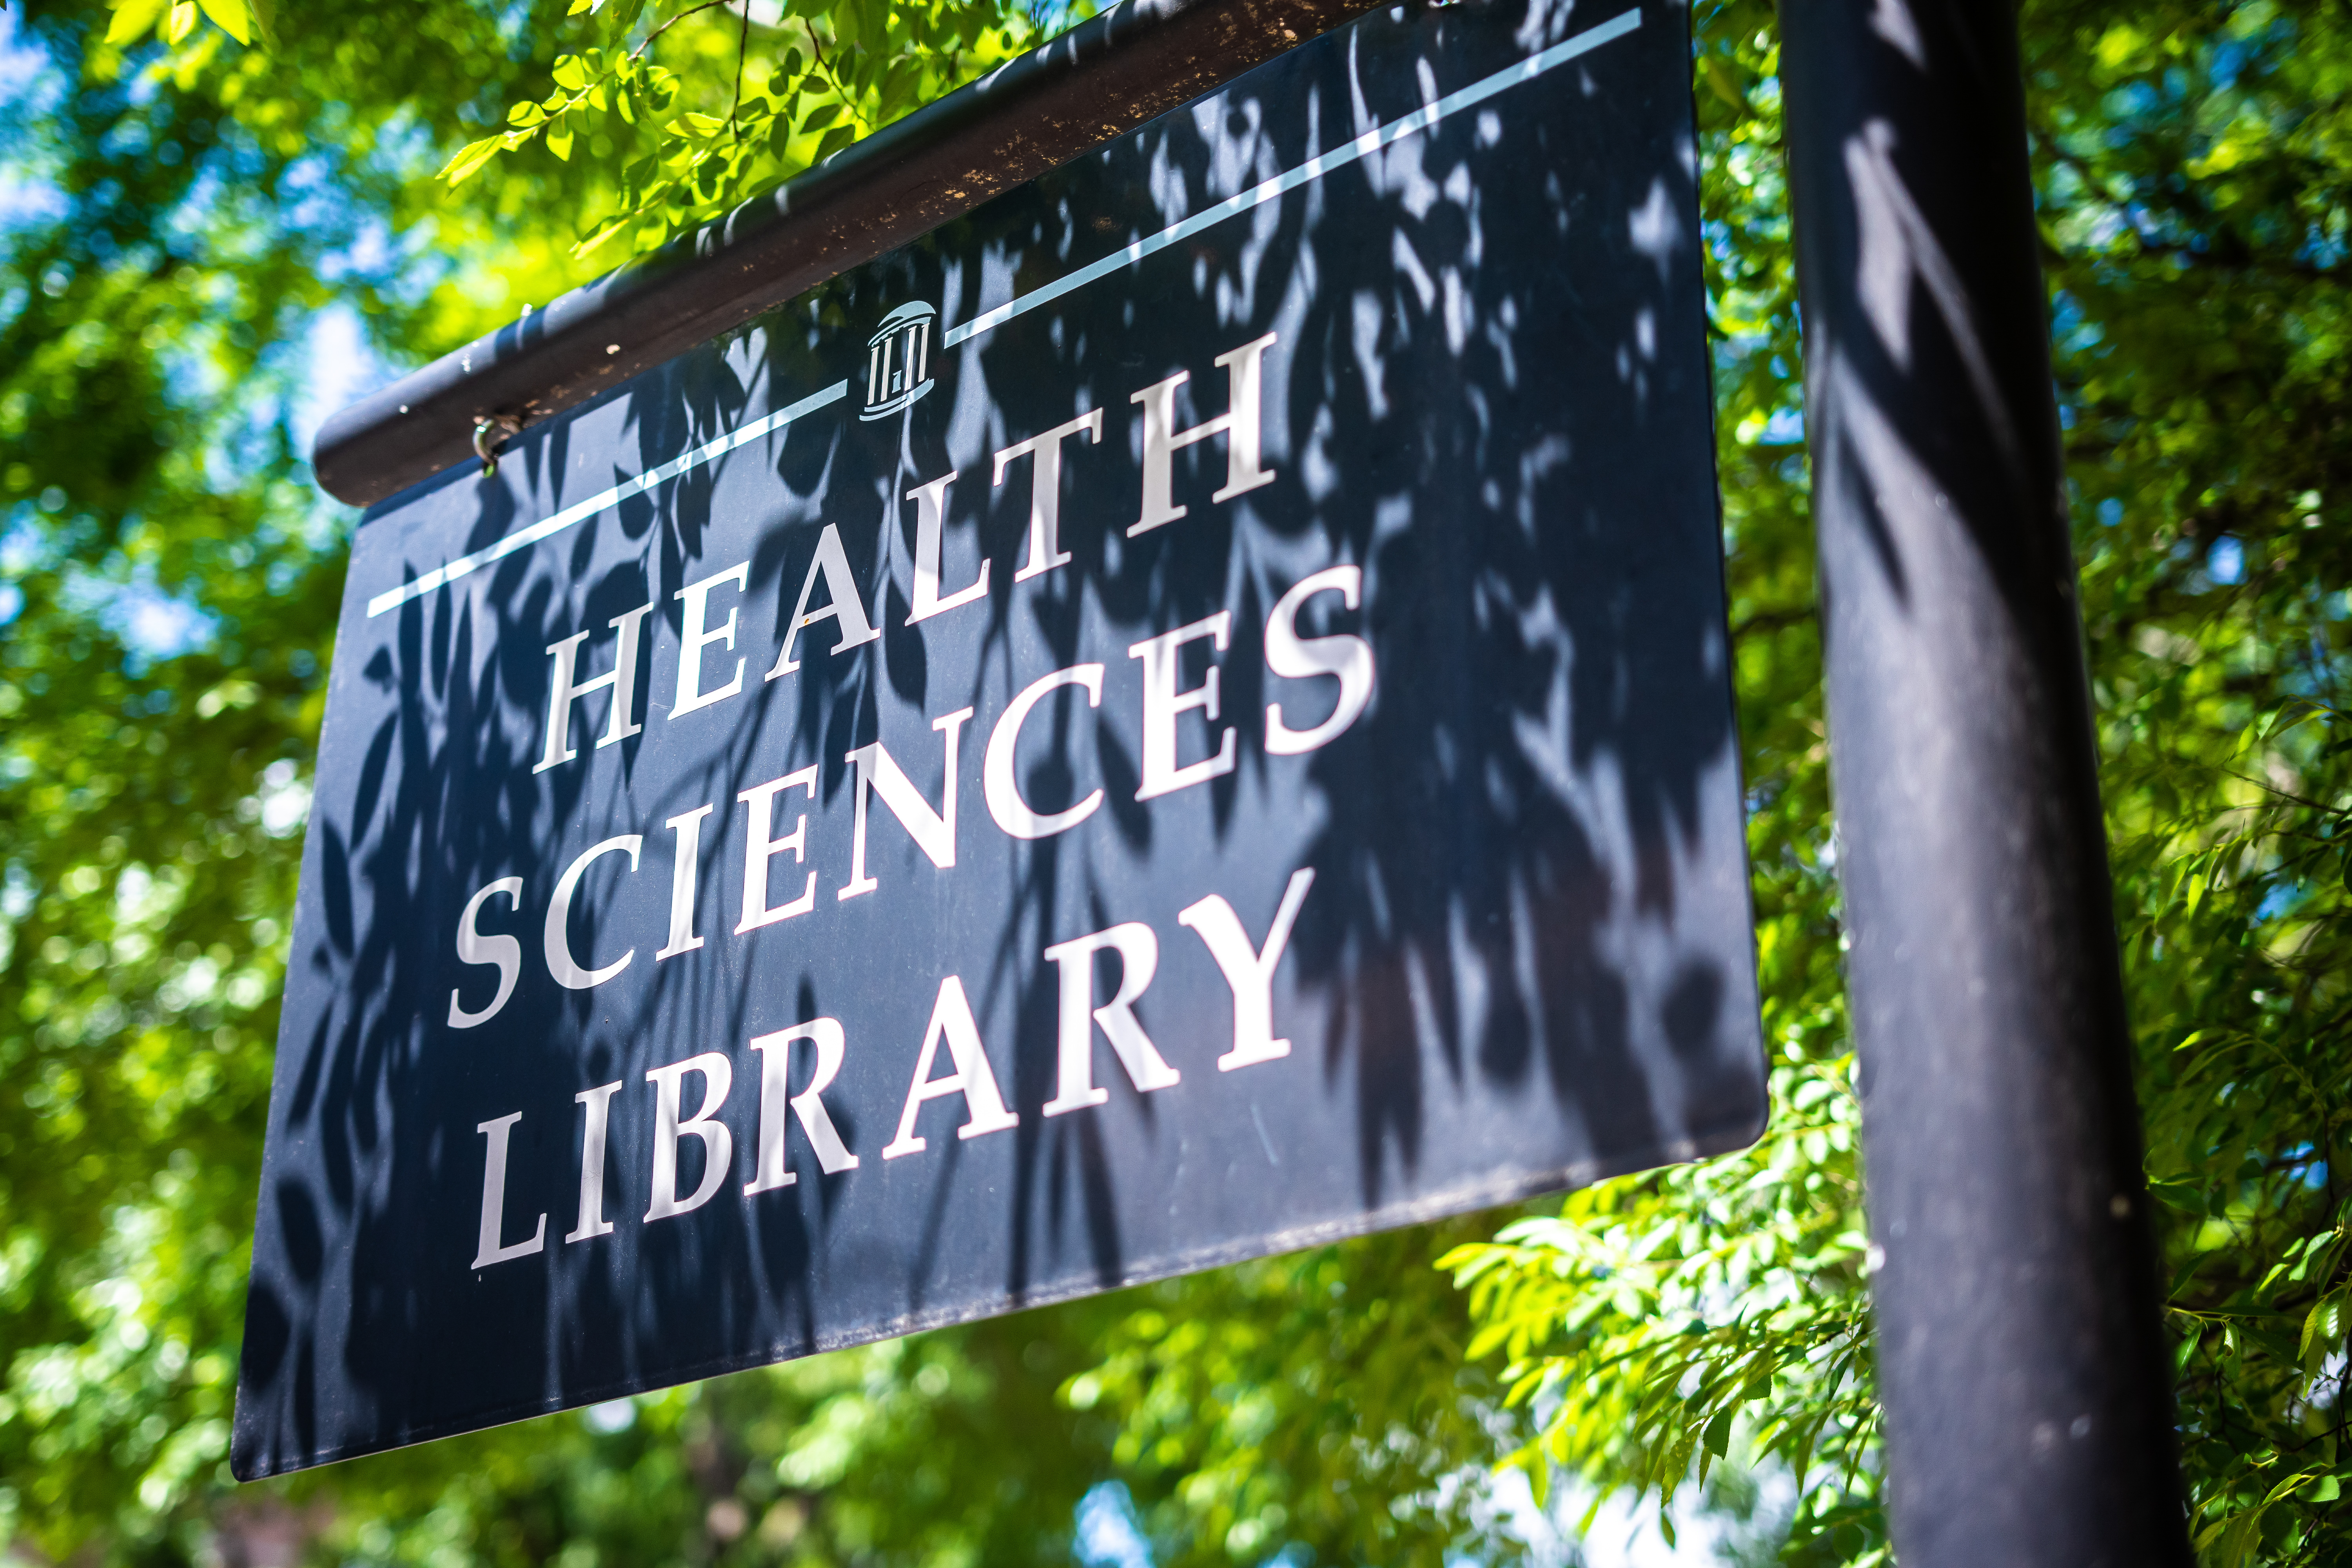 The Health Sciences Library